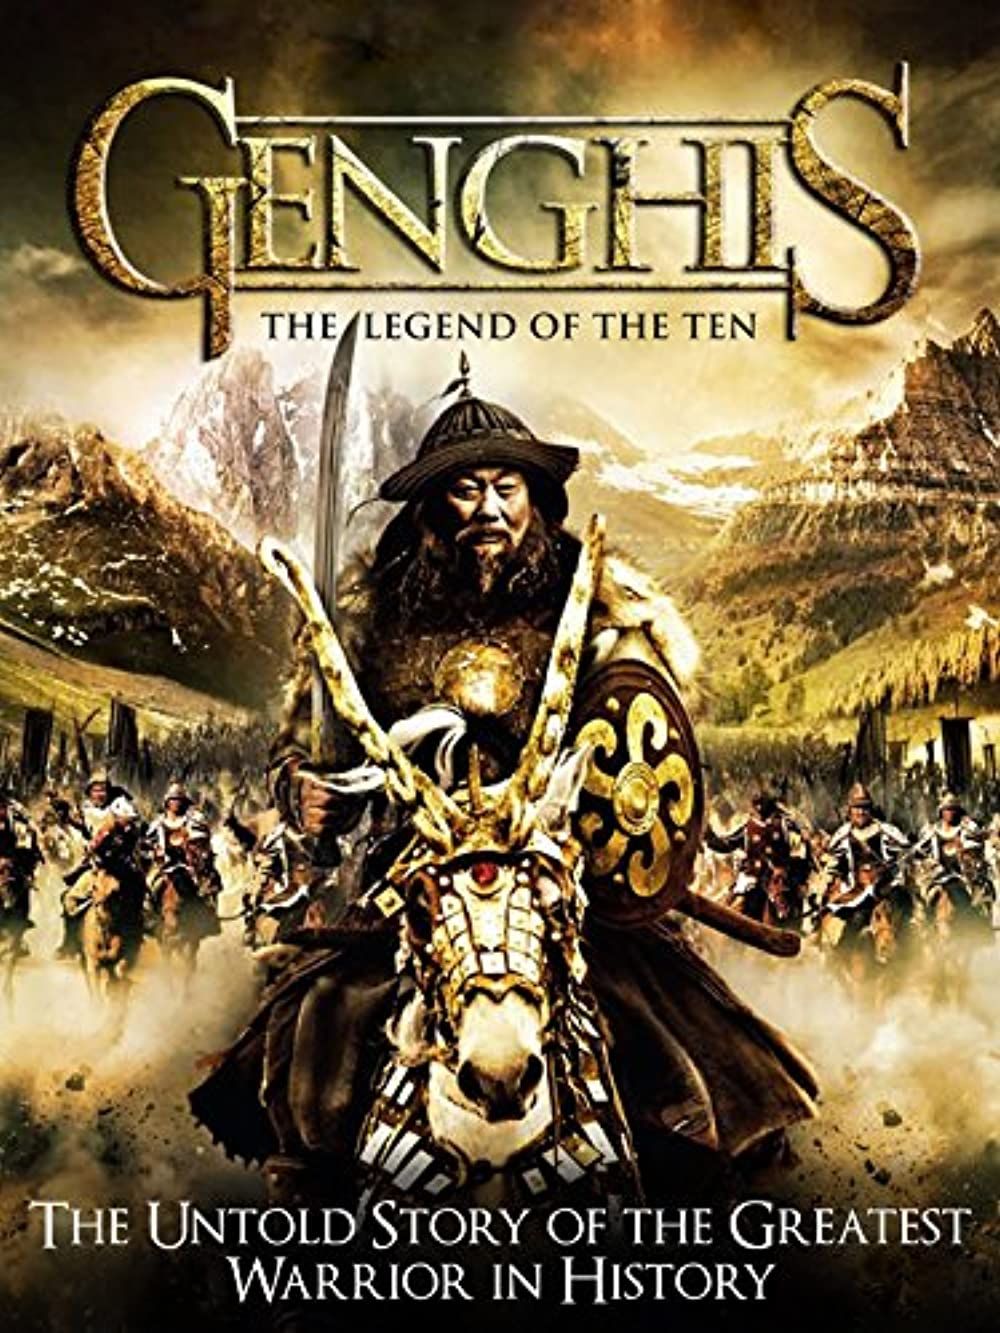 Genghis: The Legend of the Ten (2012) Hindi Dubbed BluRay download full movie